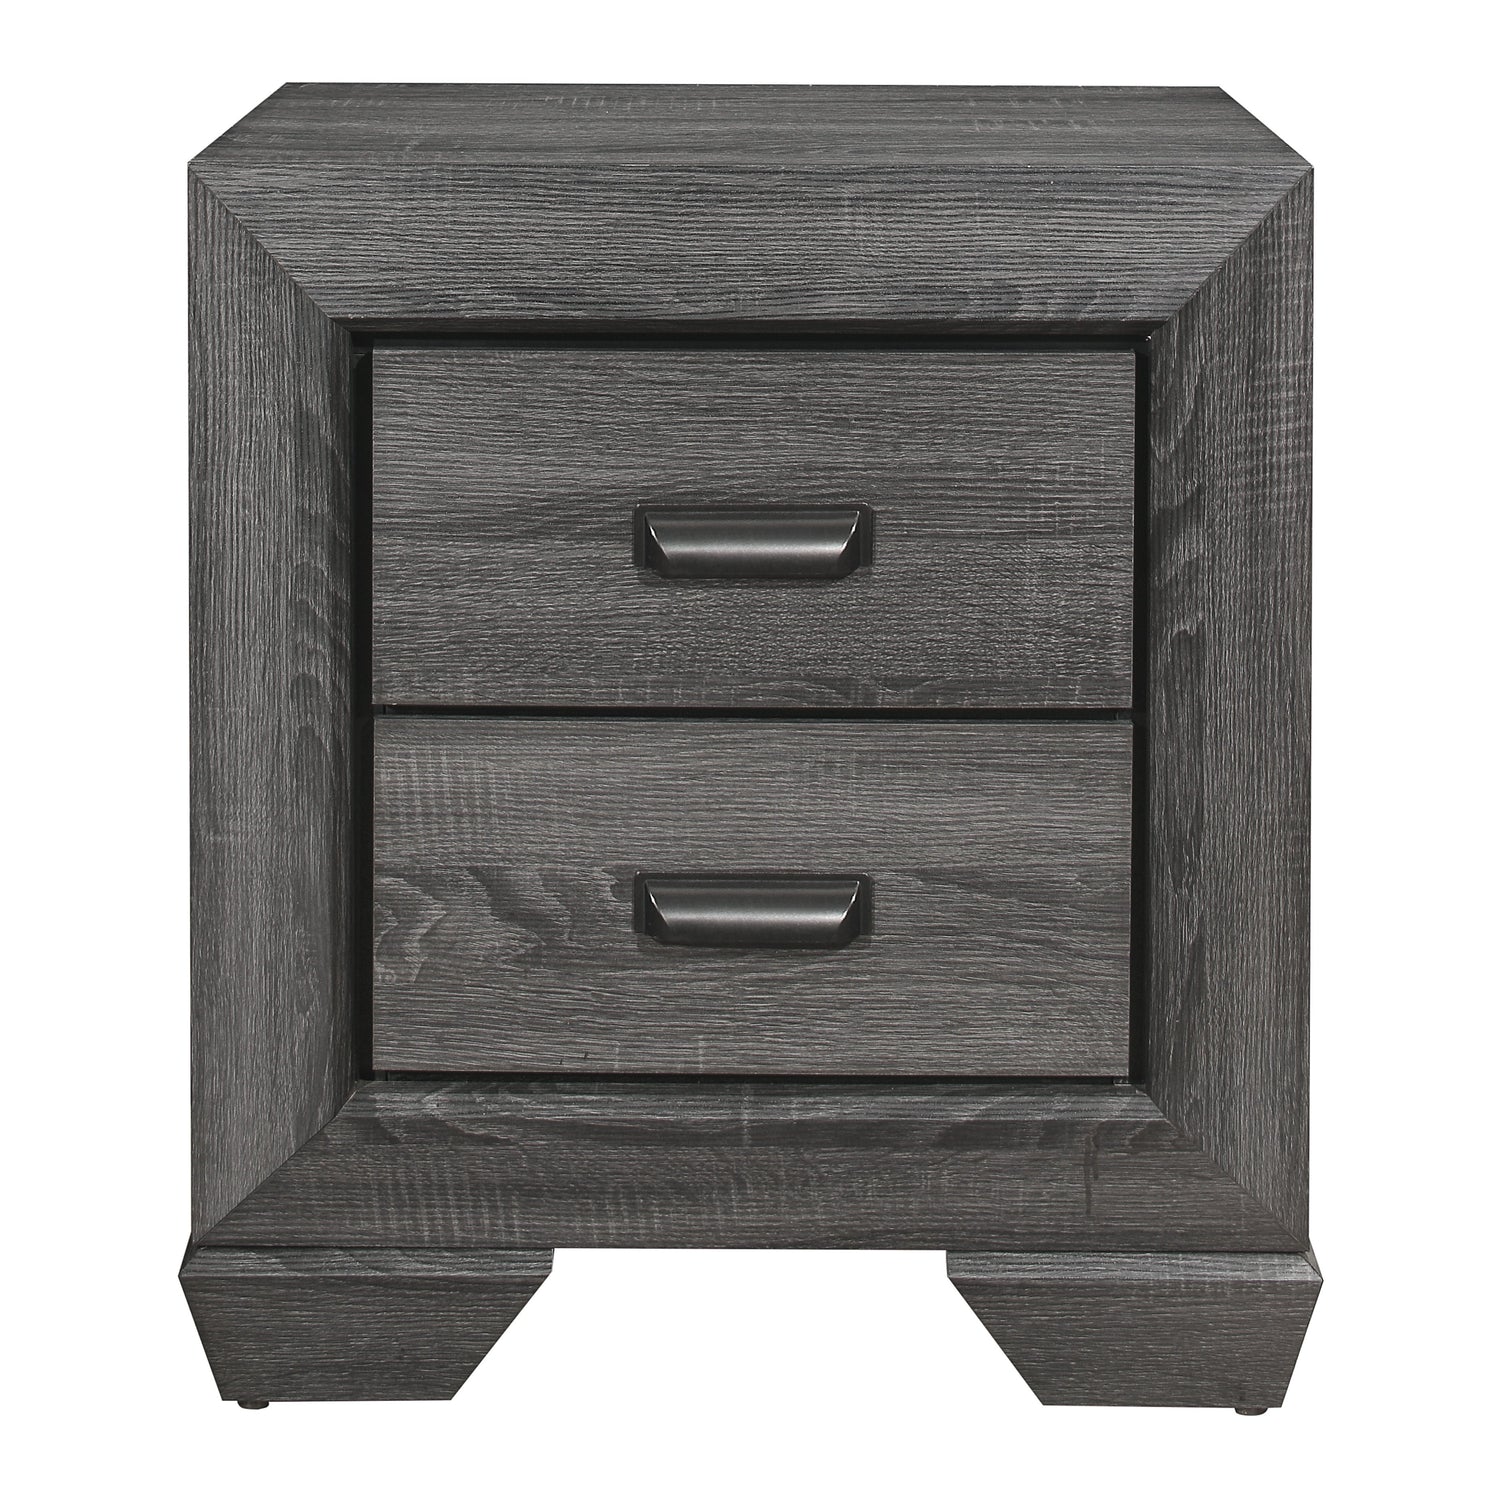 Beechnut Gray Panel Bedroom Set - SET | 1904GY-1 | 1904GY-3 | 1904GY-4 | 1904GY-9 - Bien Home Furniture &amp; Electronics